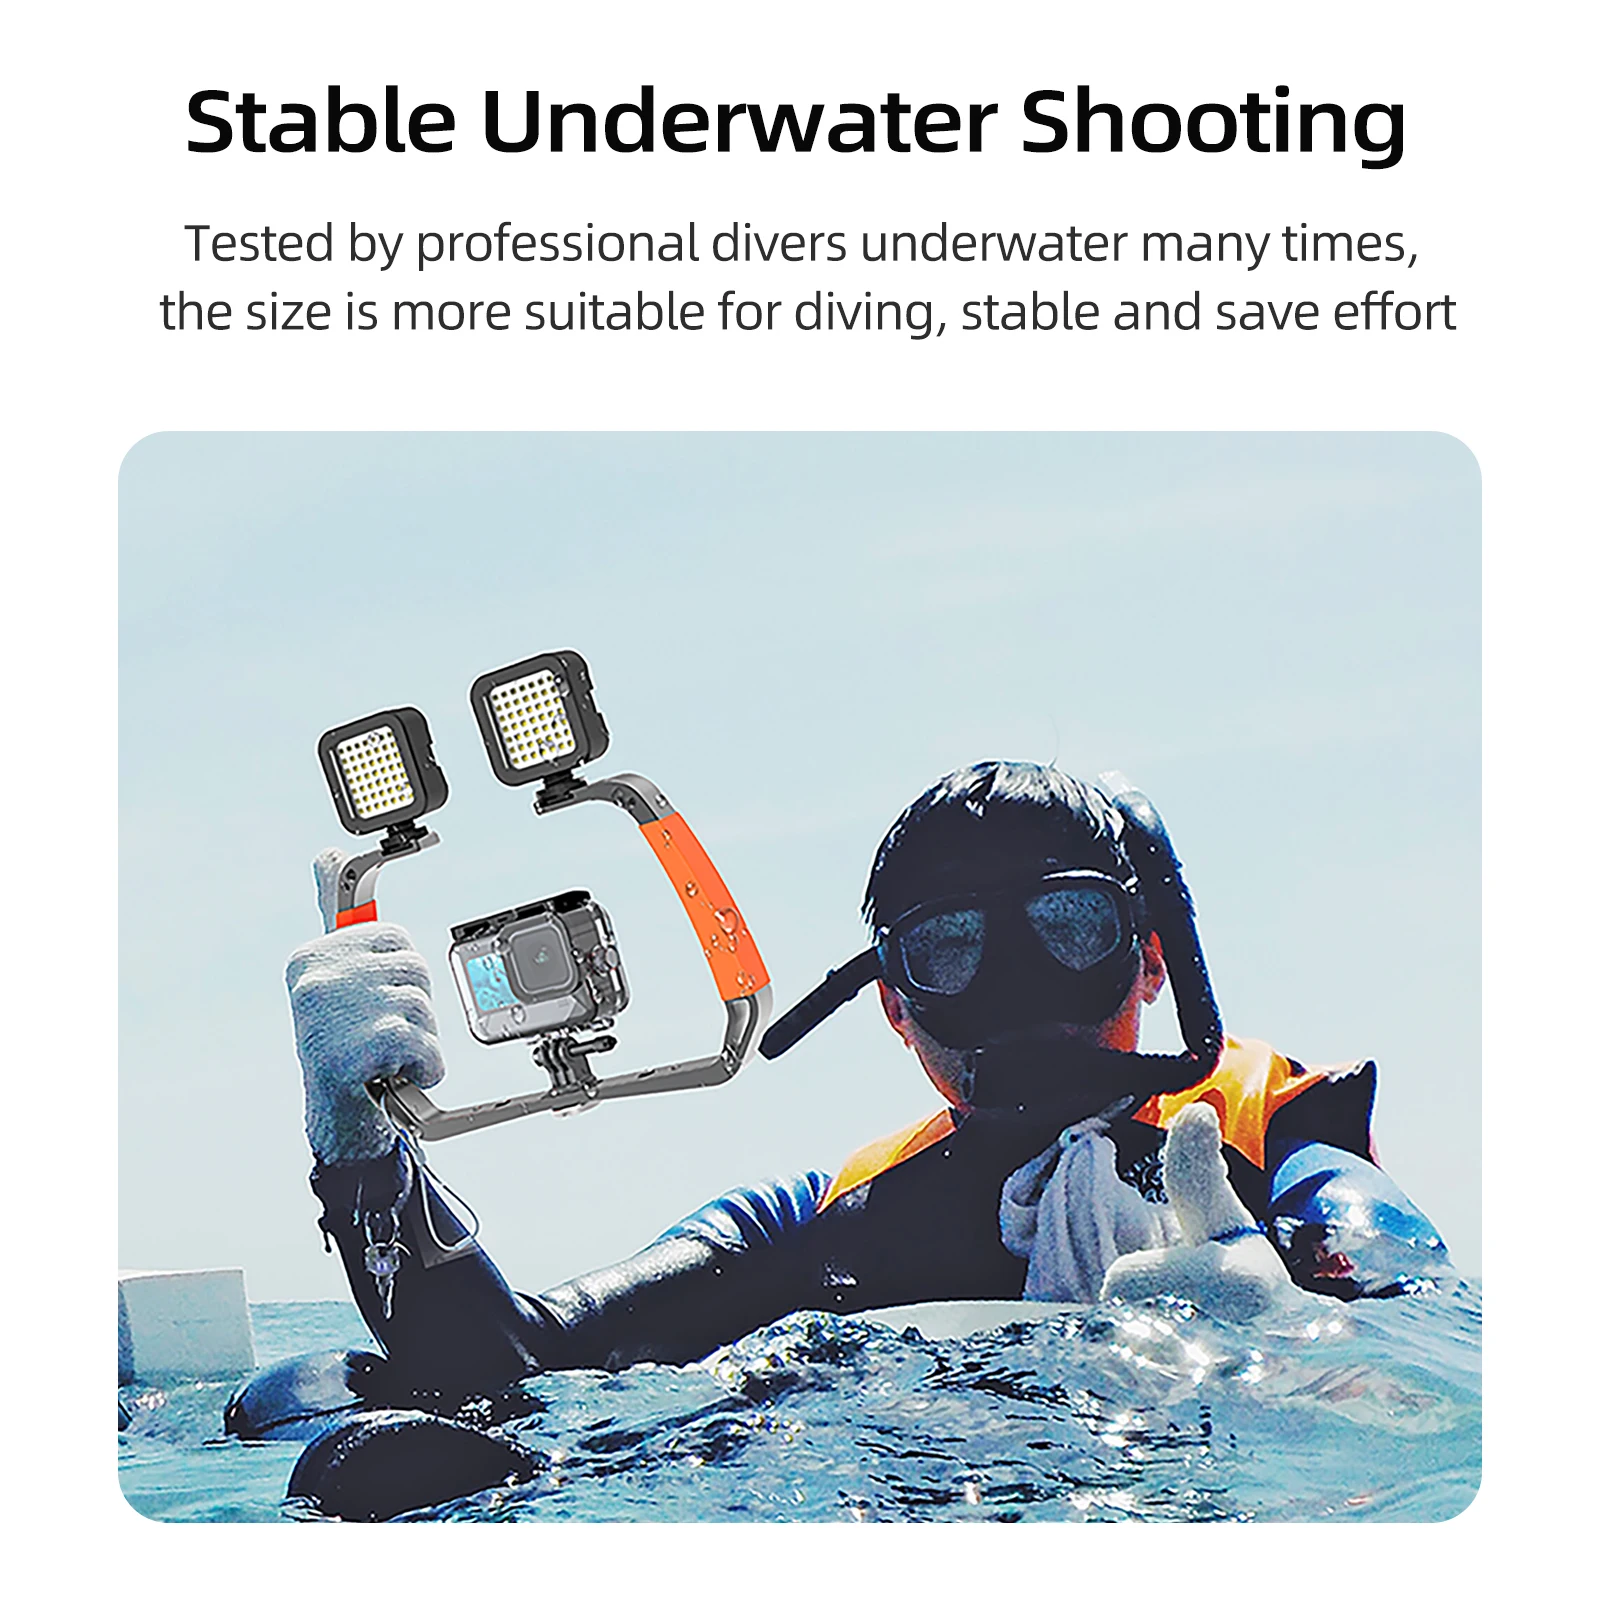 Adaptom Upgraded Diving Rig Handheld Video Dive Light Stabilizer Tray for GoPro Max Hero 10 9 8 7 6 5 Insta360 DJI Action 2 Osmo Pocket 2 Underwater Snorkeling Scuba Accessories 